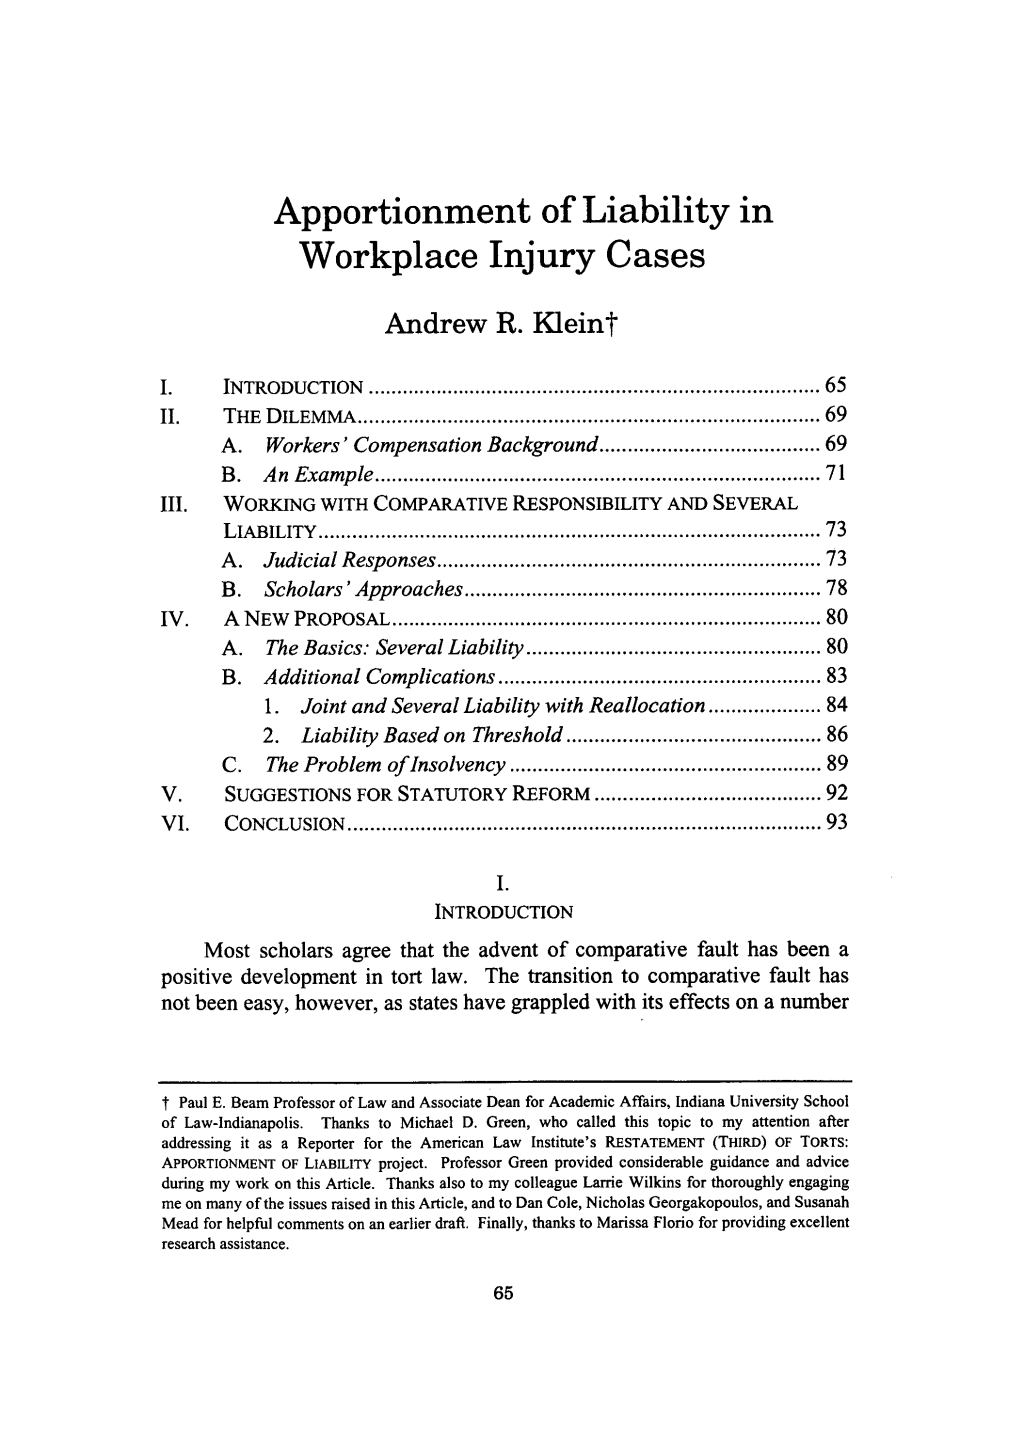 Apportionment of Liability in Workplace Injury Cases